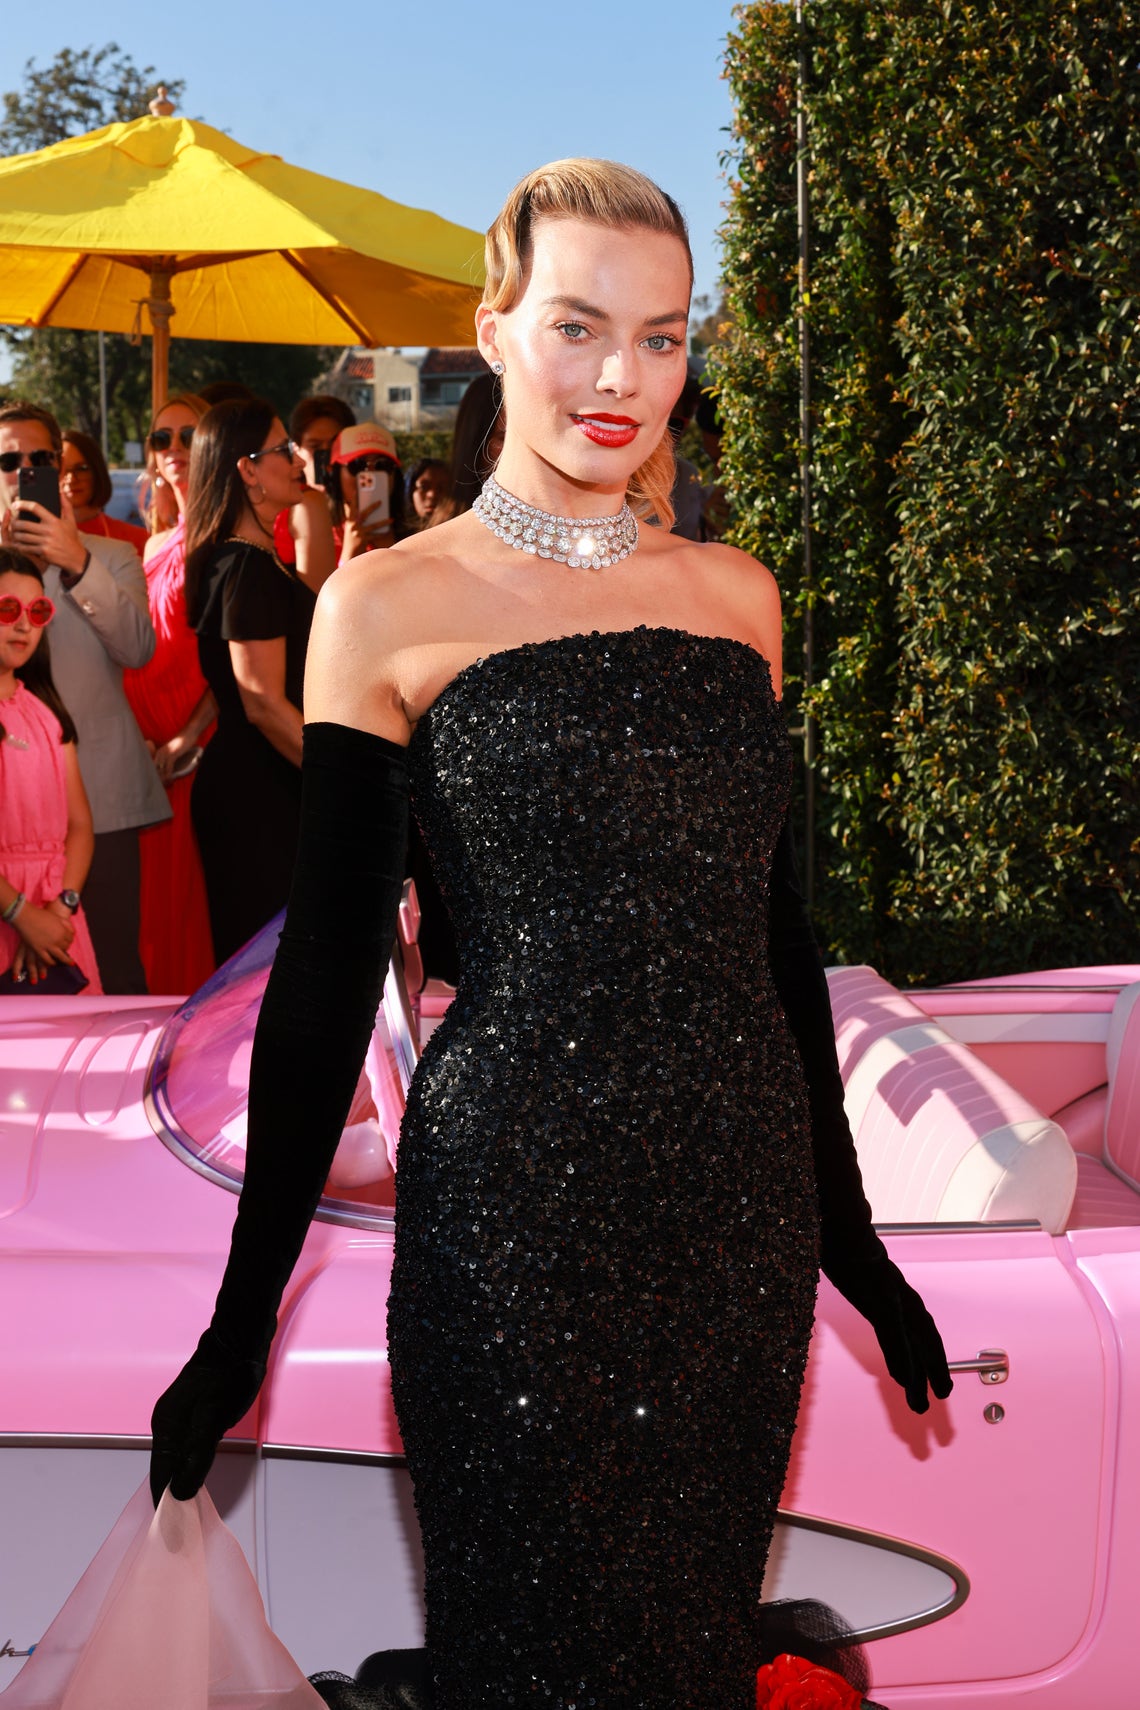 Barbie Premiere: Every Must-See Photo from the Pink Carpet